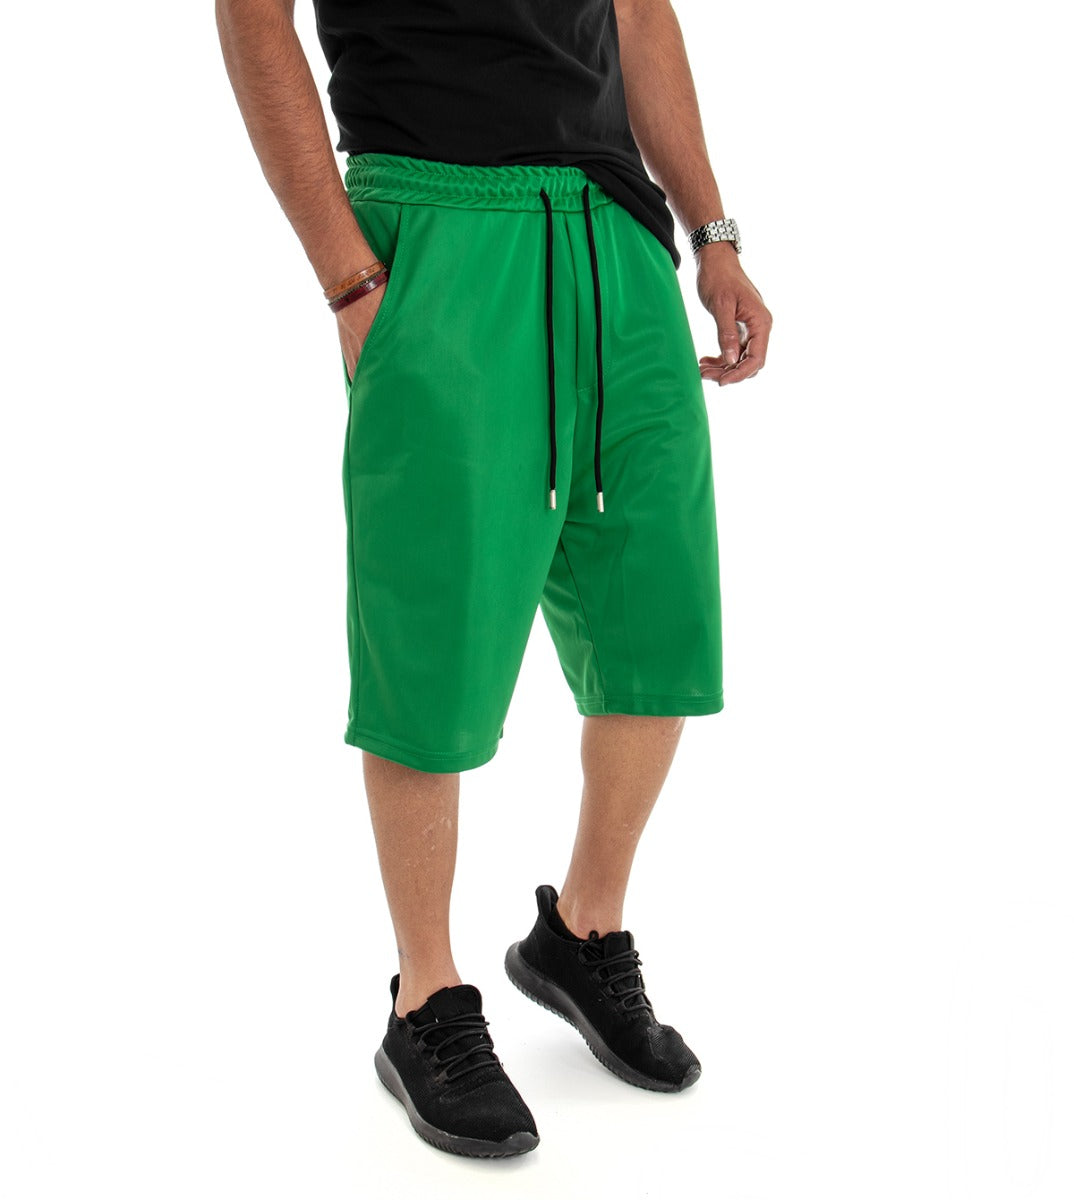 Men's Bermuda Shorts Oversized Solid Color Green GIOSAL-PC1472A